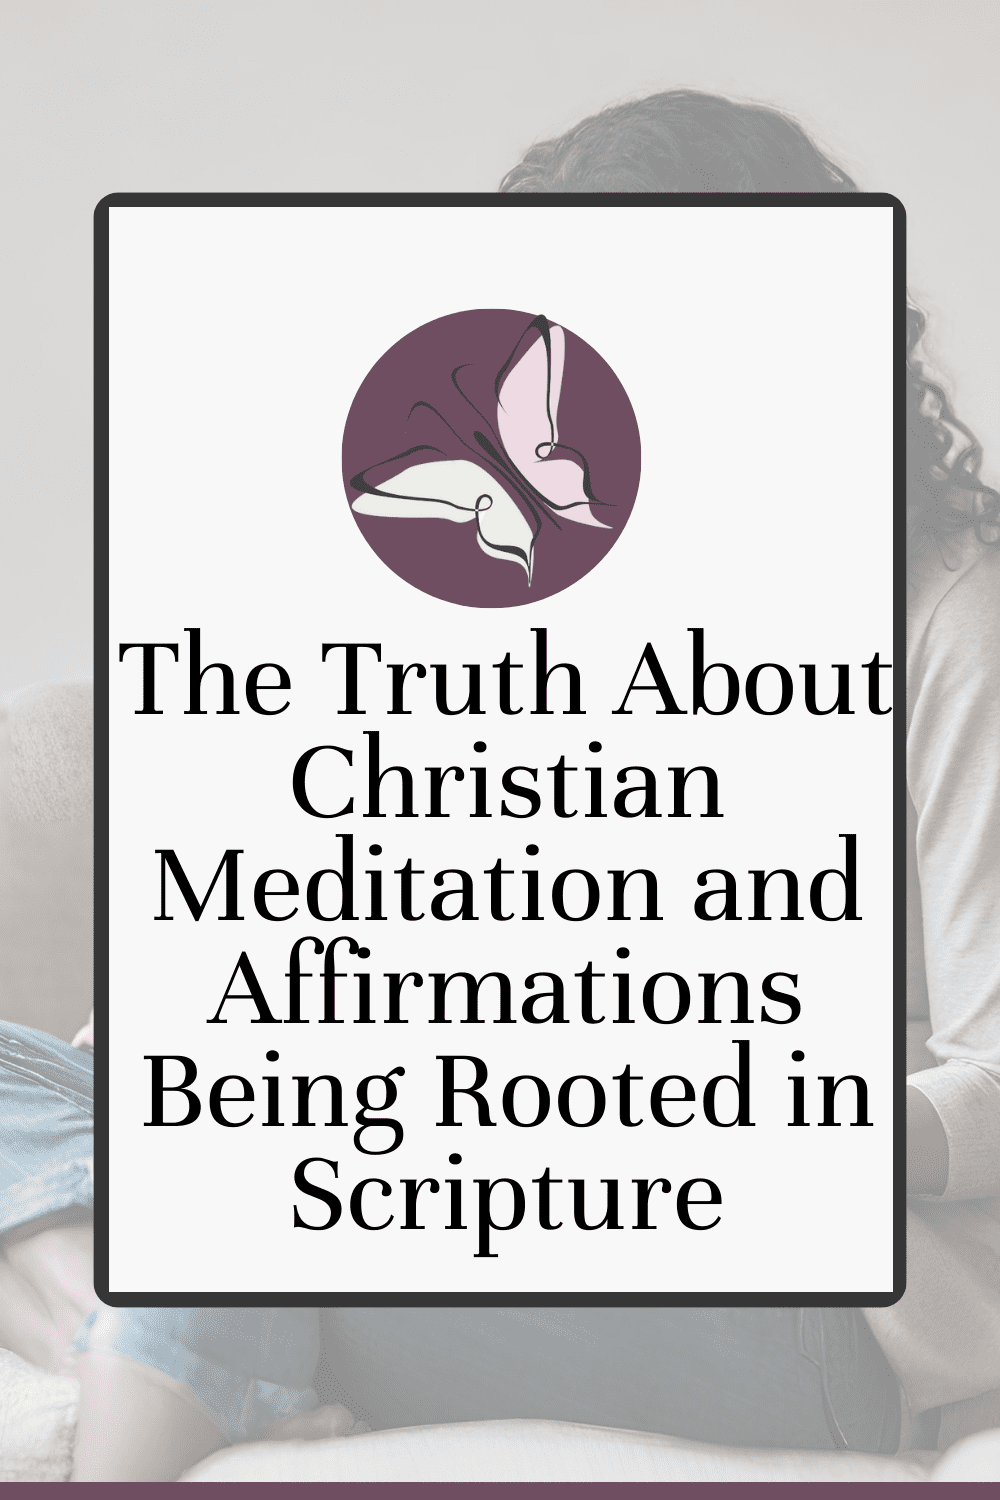 There's a lot of noise around mediation and affirmations for Christian women. Learn the truth about this spiritual growth methods plus the easy 3 step system that will help you meditate on scripture.